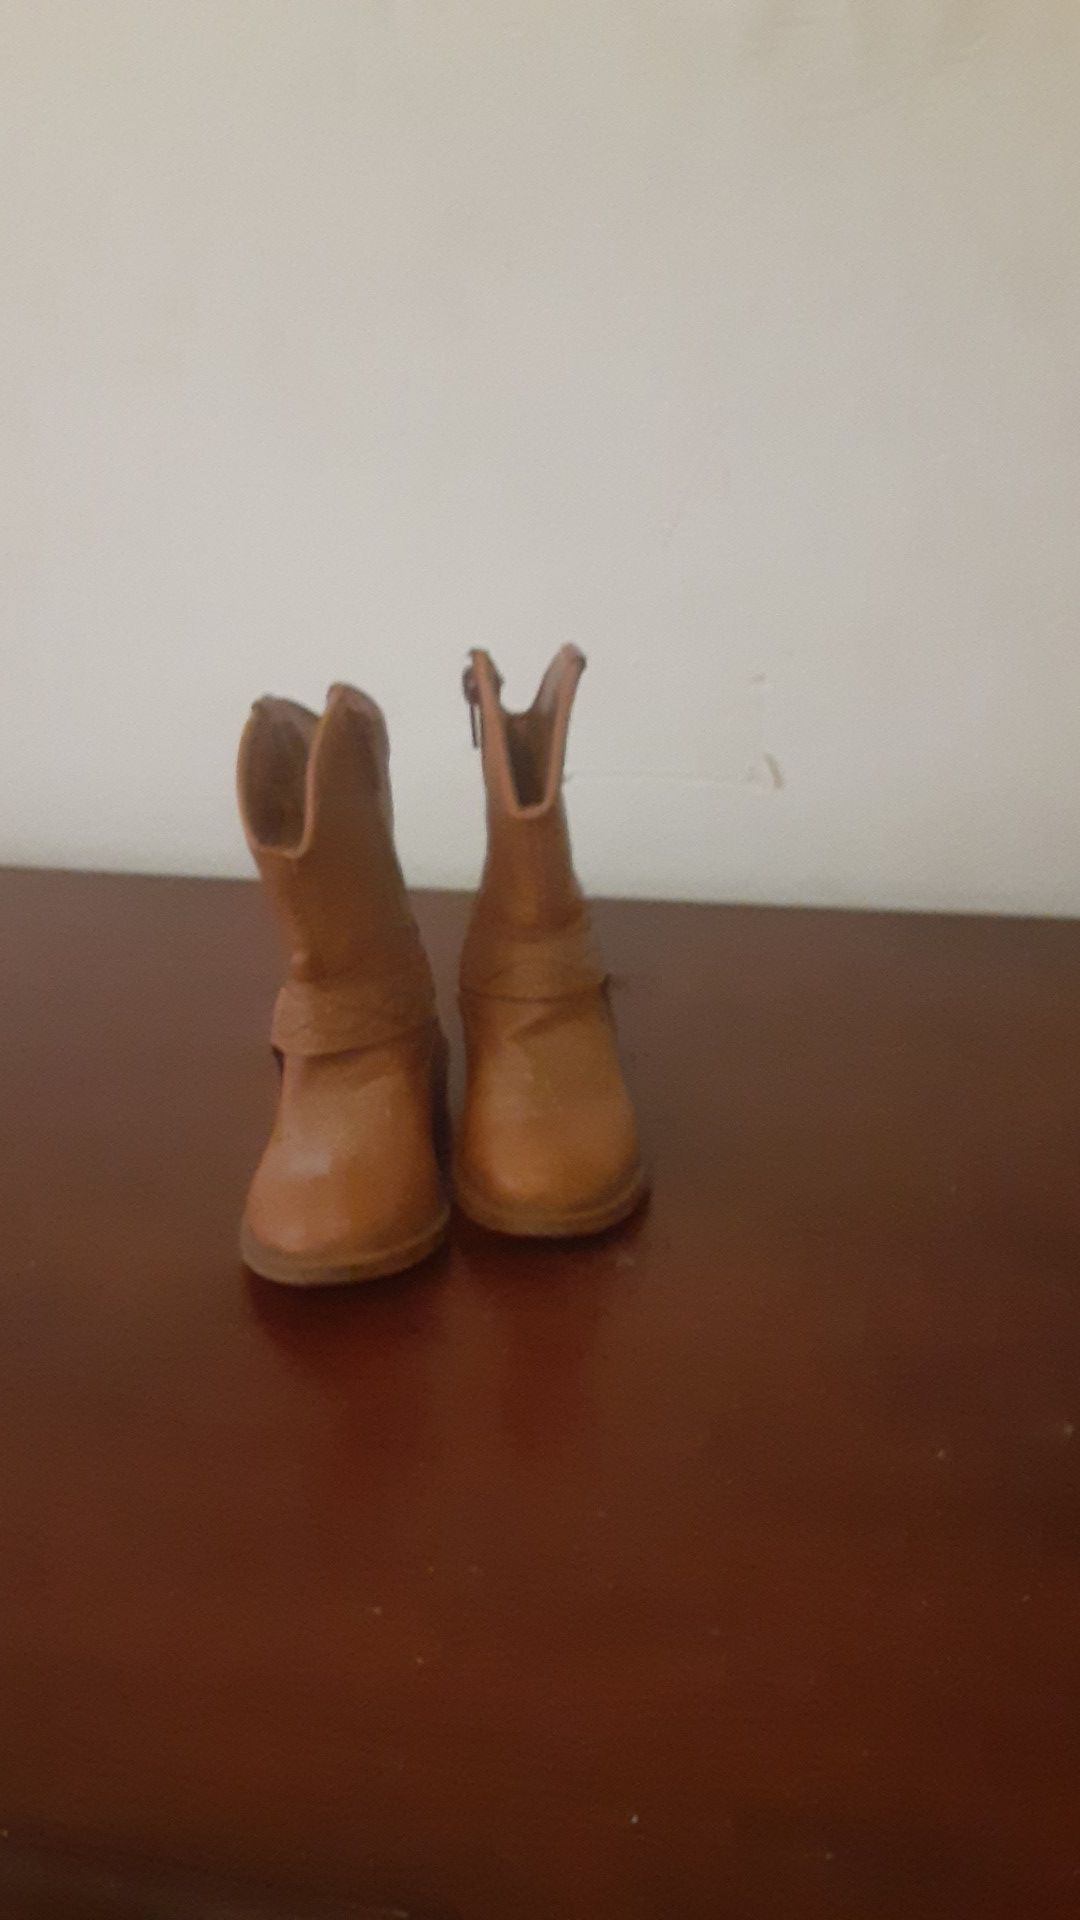 Girls boots size 6